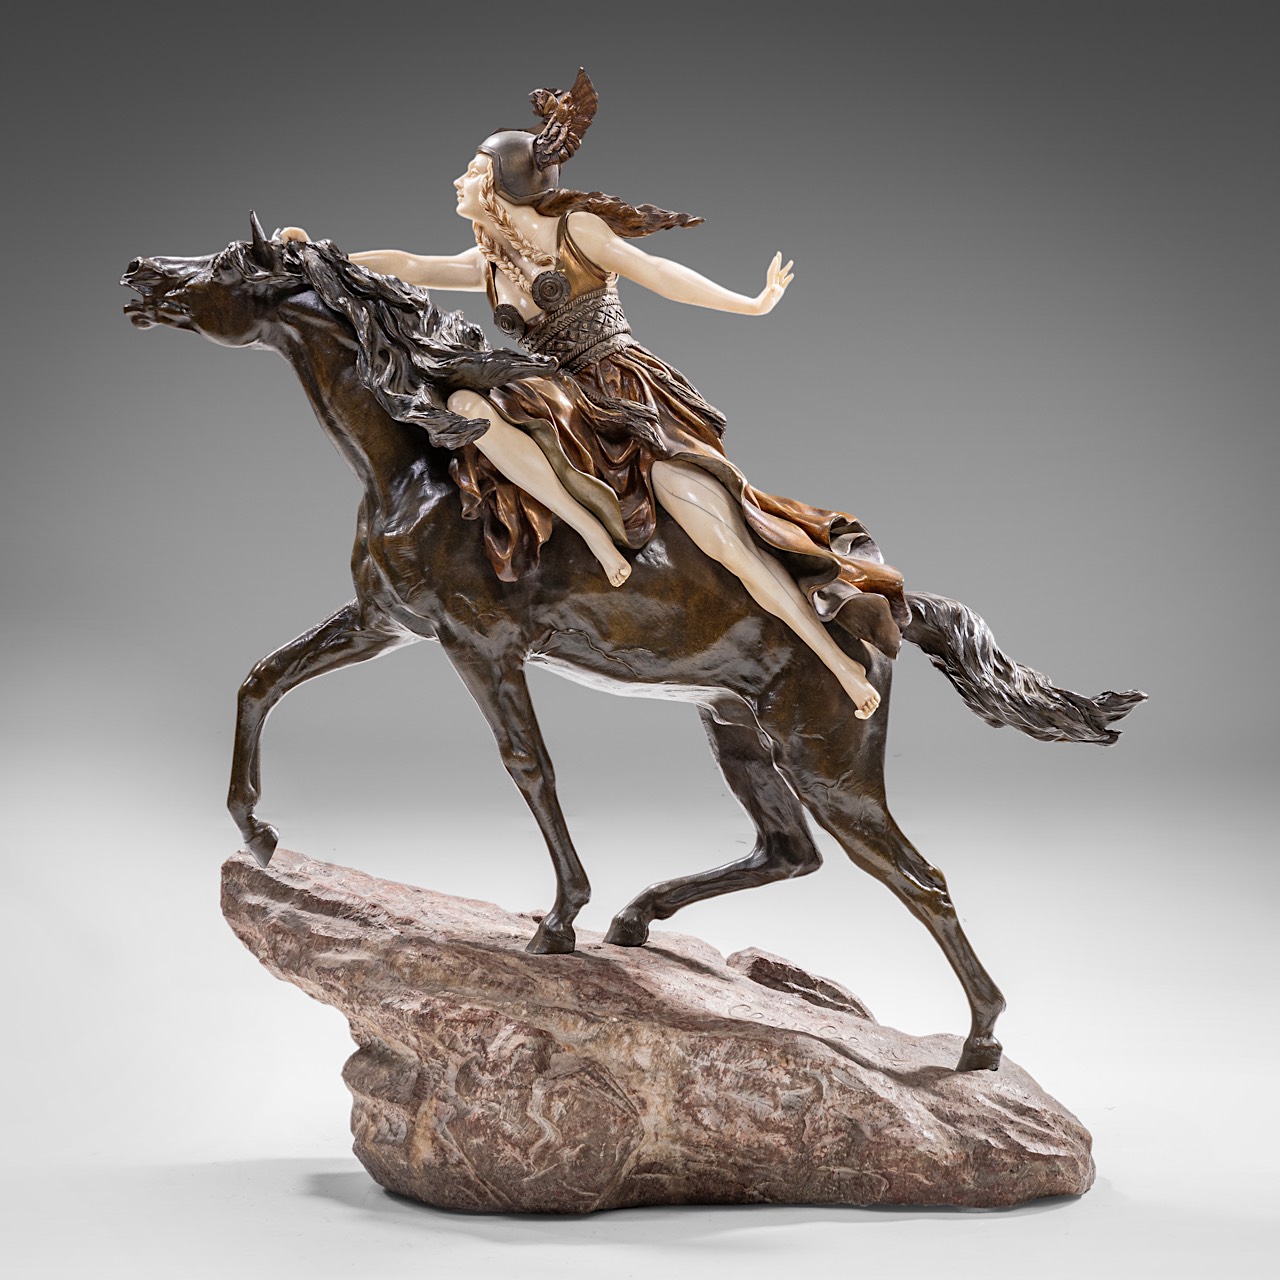 Claire Jeanne Roberte Colinet (1880-1950), 'Valkiria - Towards the Unknown', chryselephantine sculpt - Image 13 of 14